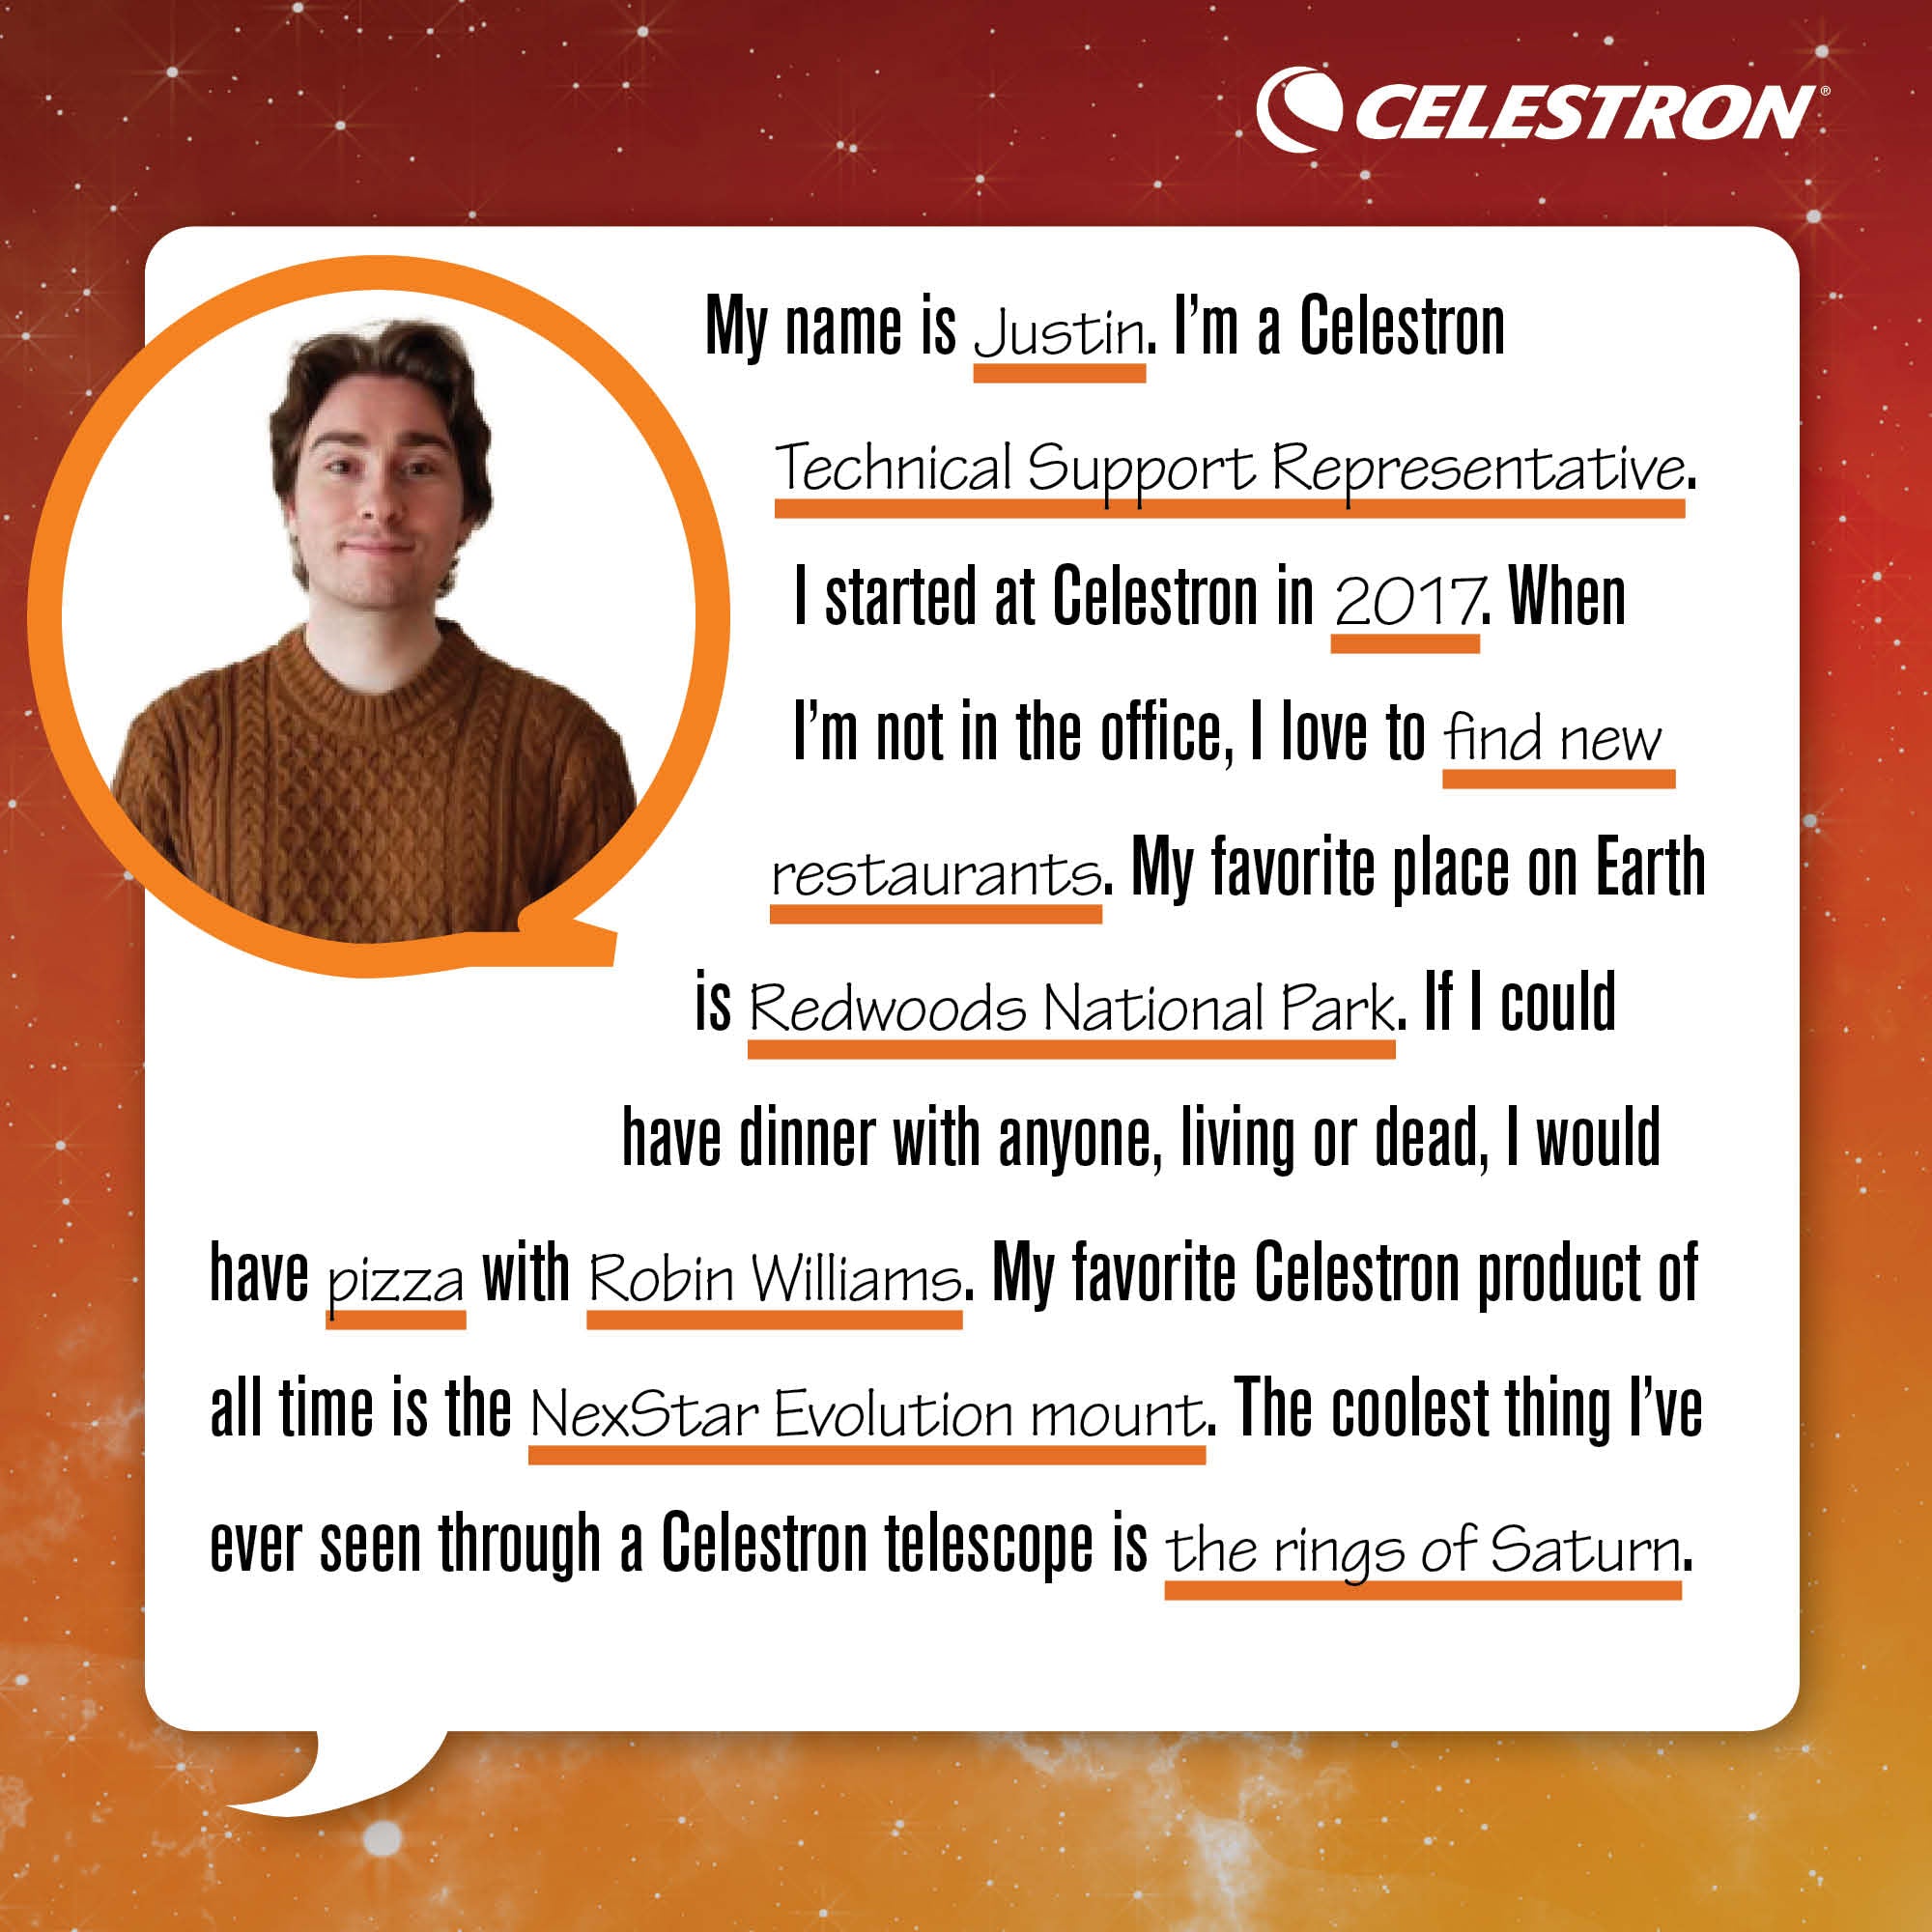 My name is Justin. I'm Celestron's technical support representative. I started at Celestron in 2017. When I'm not in the office, I love to find new restaurants.  My favorite place on Earth is Redwoods National Park. If I could have dinner with anyone, living or dead, I would have pizza with Robin Williams. My favorite Celestron product of all time is the NexStar Evolution mount. The coolest thing I've ever seen through a Celestron telescope is the rings of Saturn.